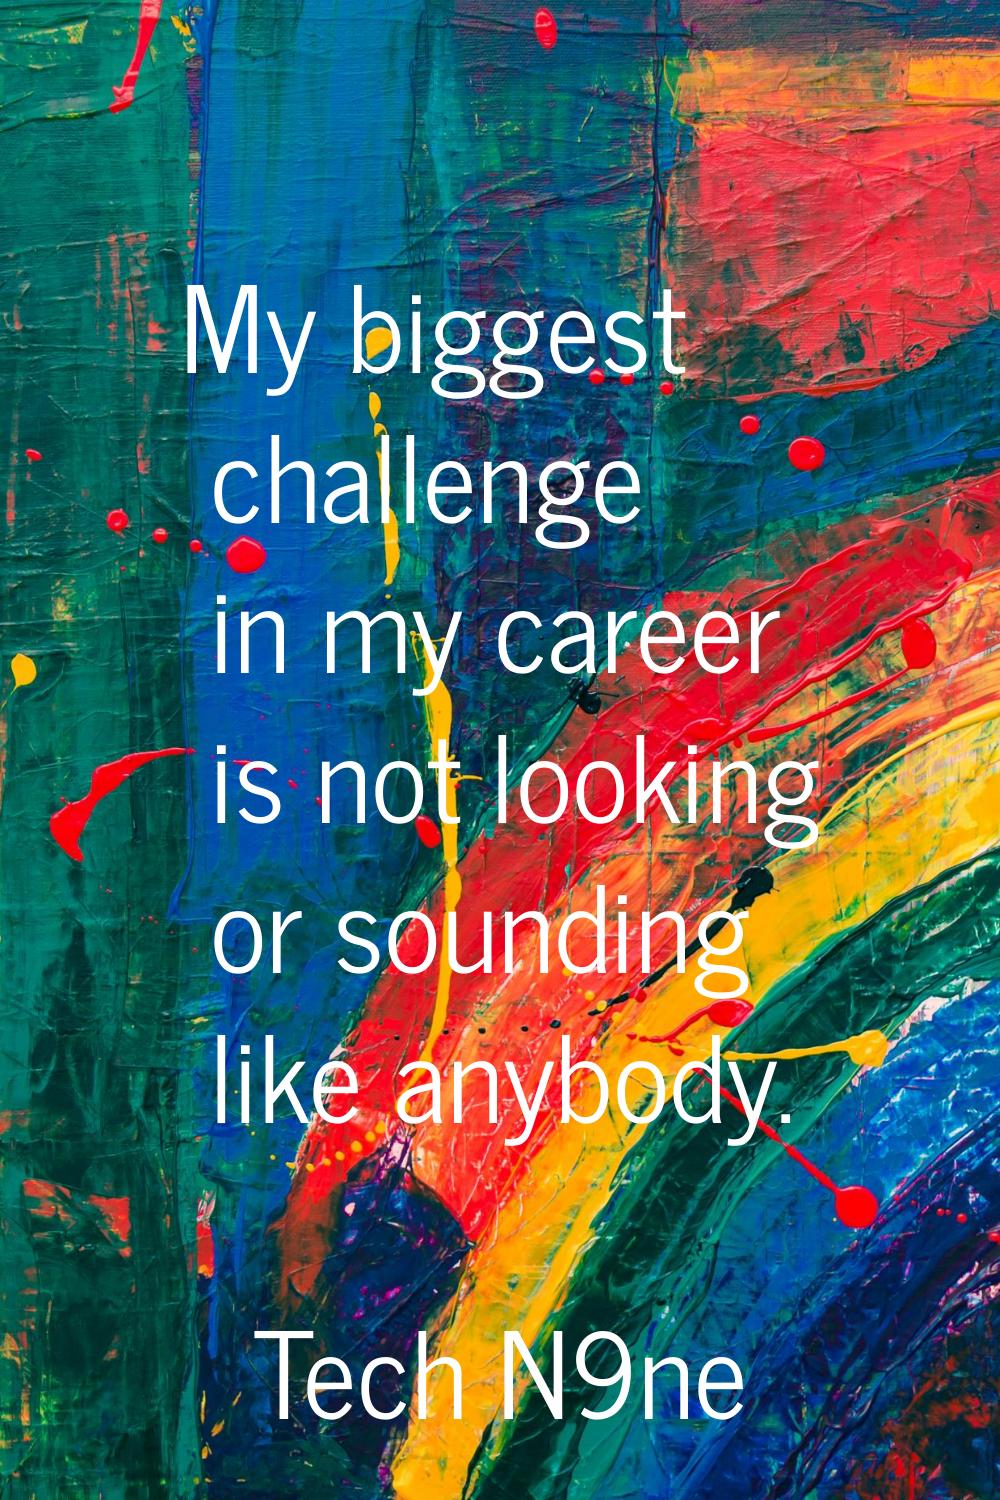 My biggest challenge in my career is not looking or sounding like anybody.